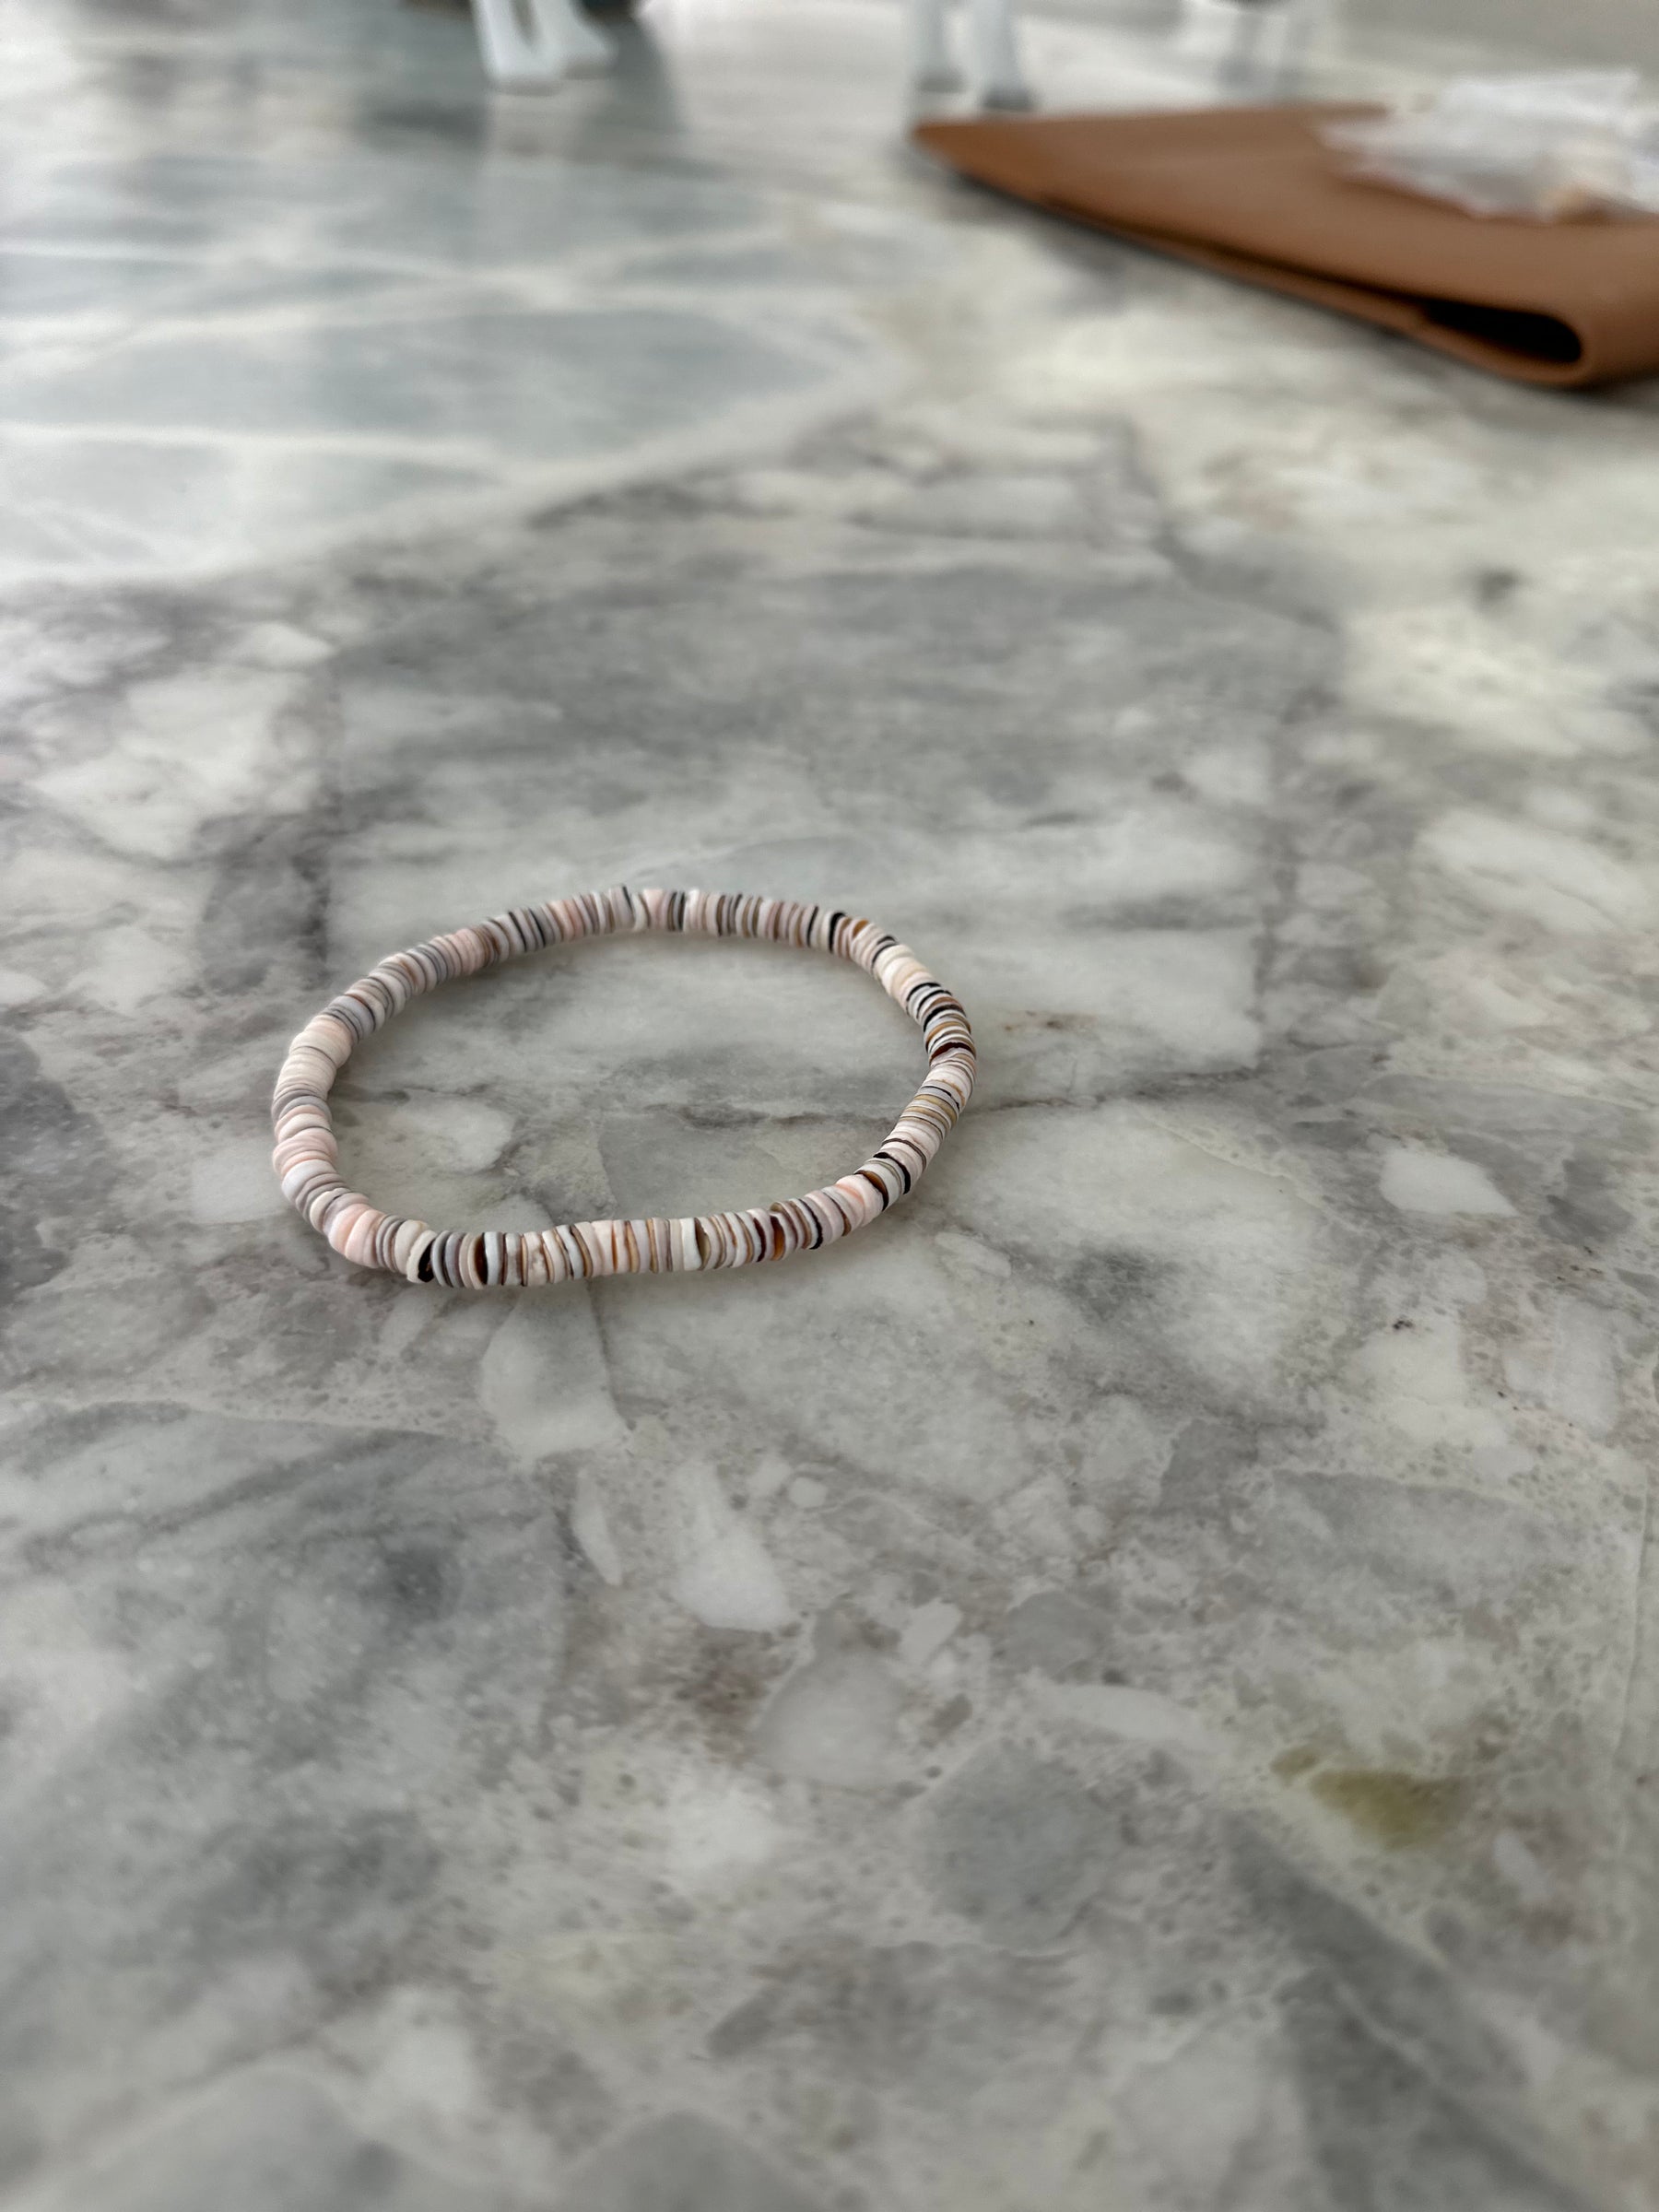 Bracelet coquillage nude homme.